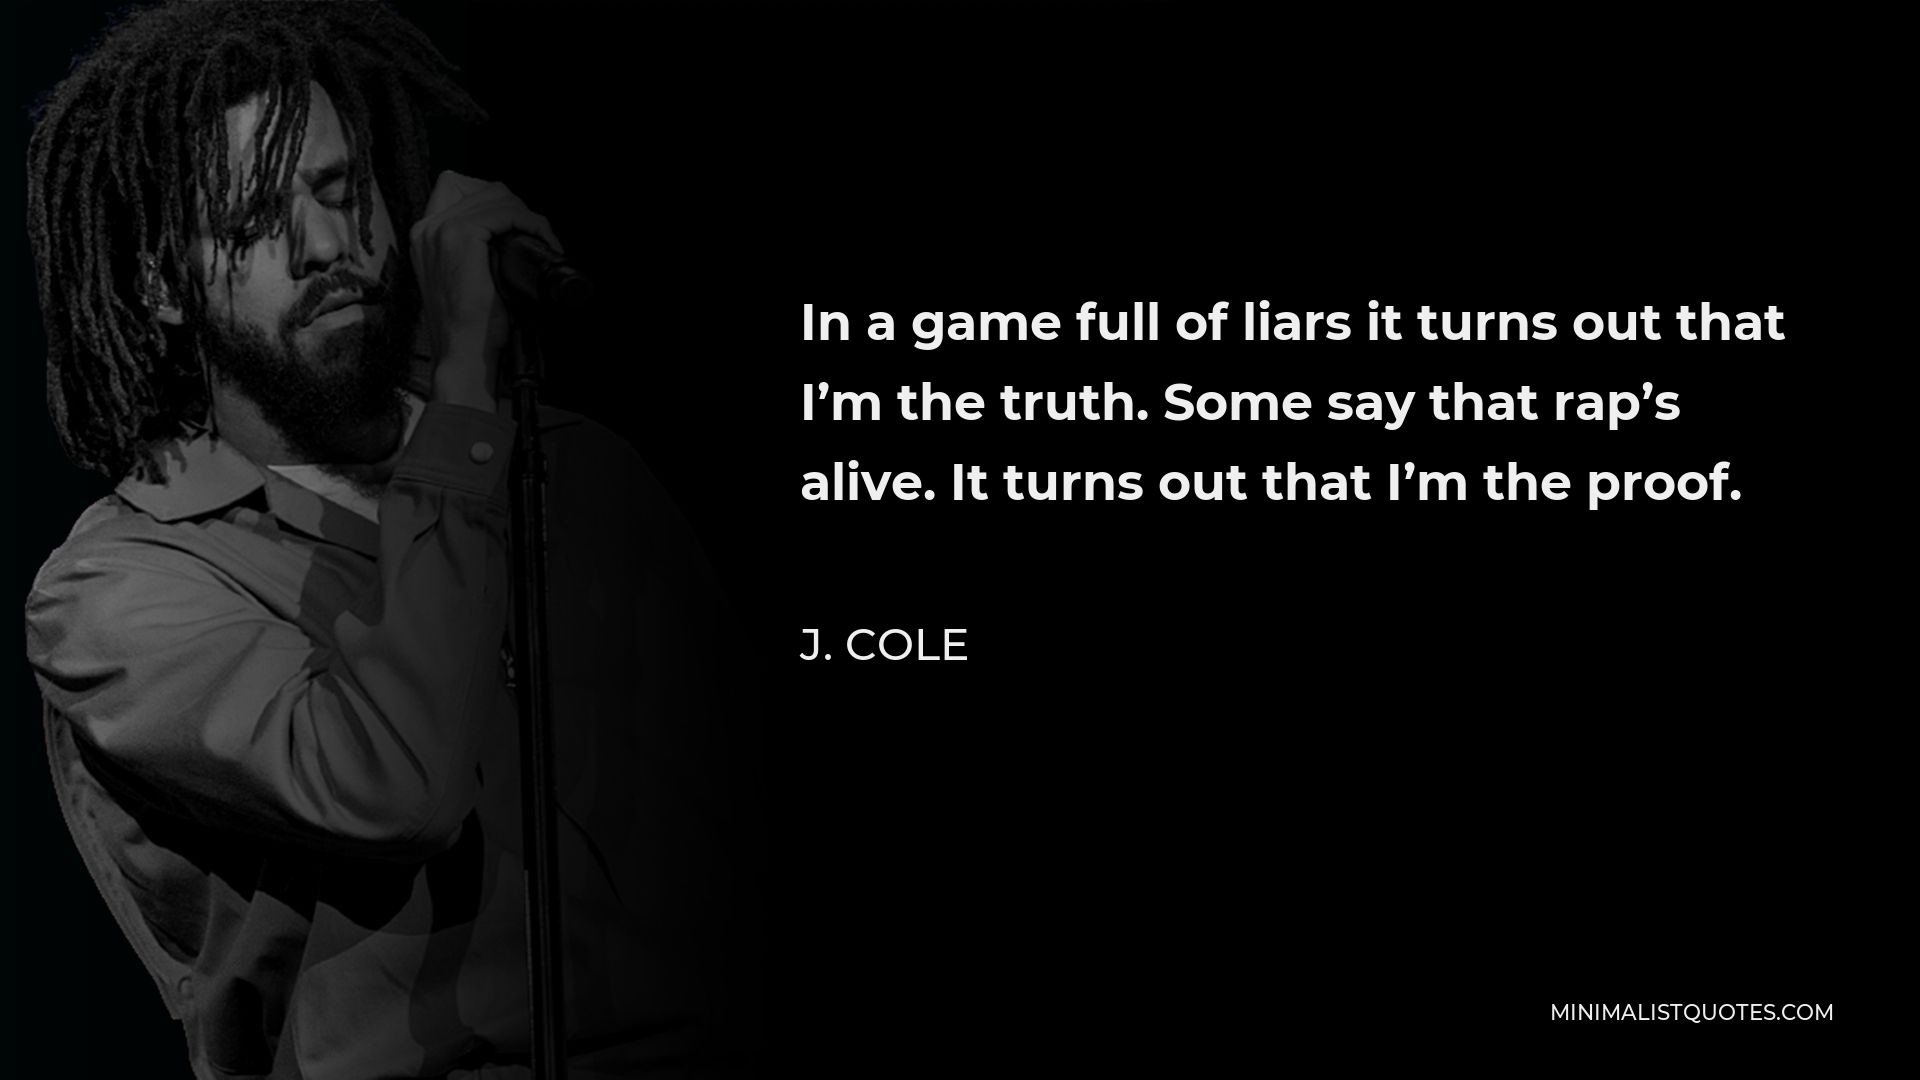 J. Cole Quote - In a game full of liars it turns out that I’m the truth. Some say that rap’s alive. It turns out that I’m the proof.